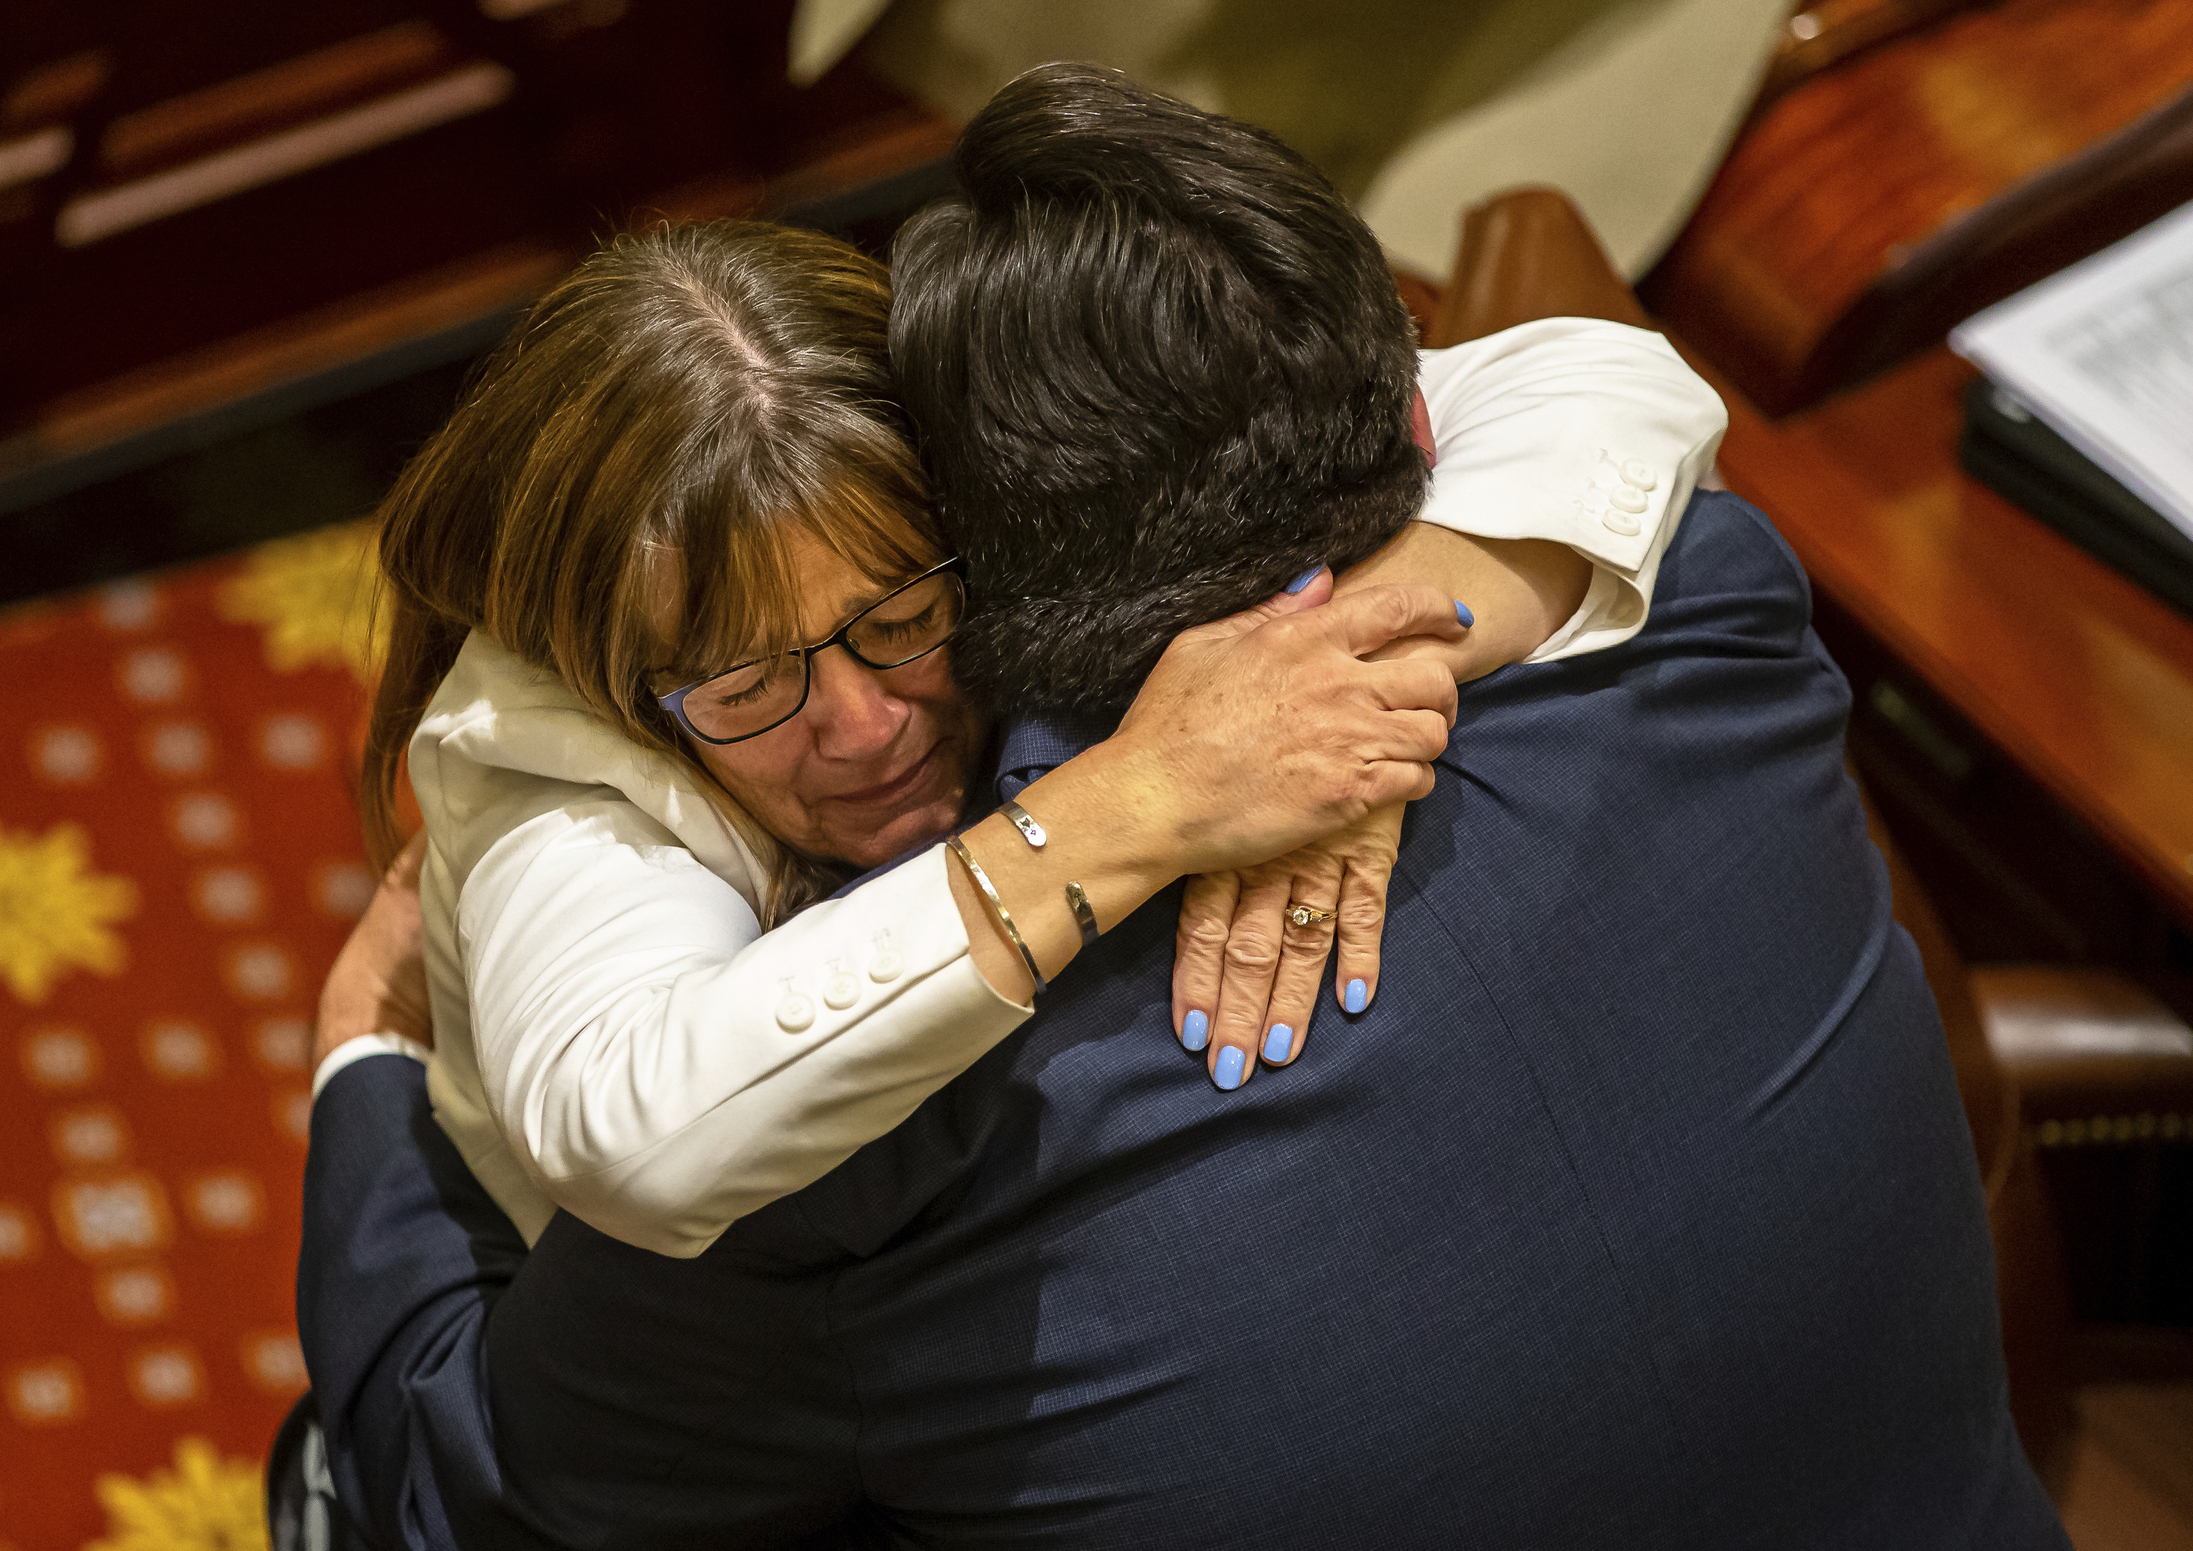 PHOTO: Gov. J.B. Pritzker hugs state Sen. Melinda Bush as they celebrate the Illinois Senate passage of the Reproductive Health Act, late Friday, May 31, 2019, in Springfield, Ill.